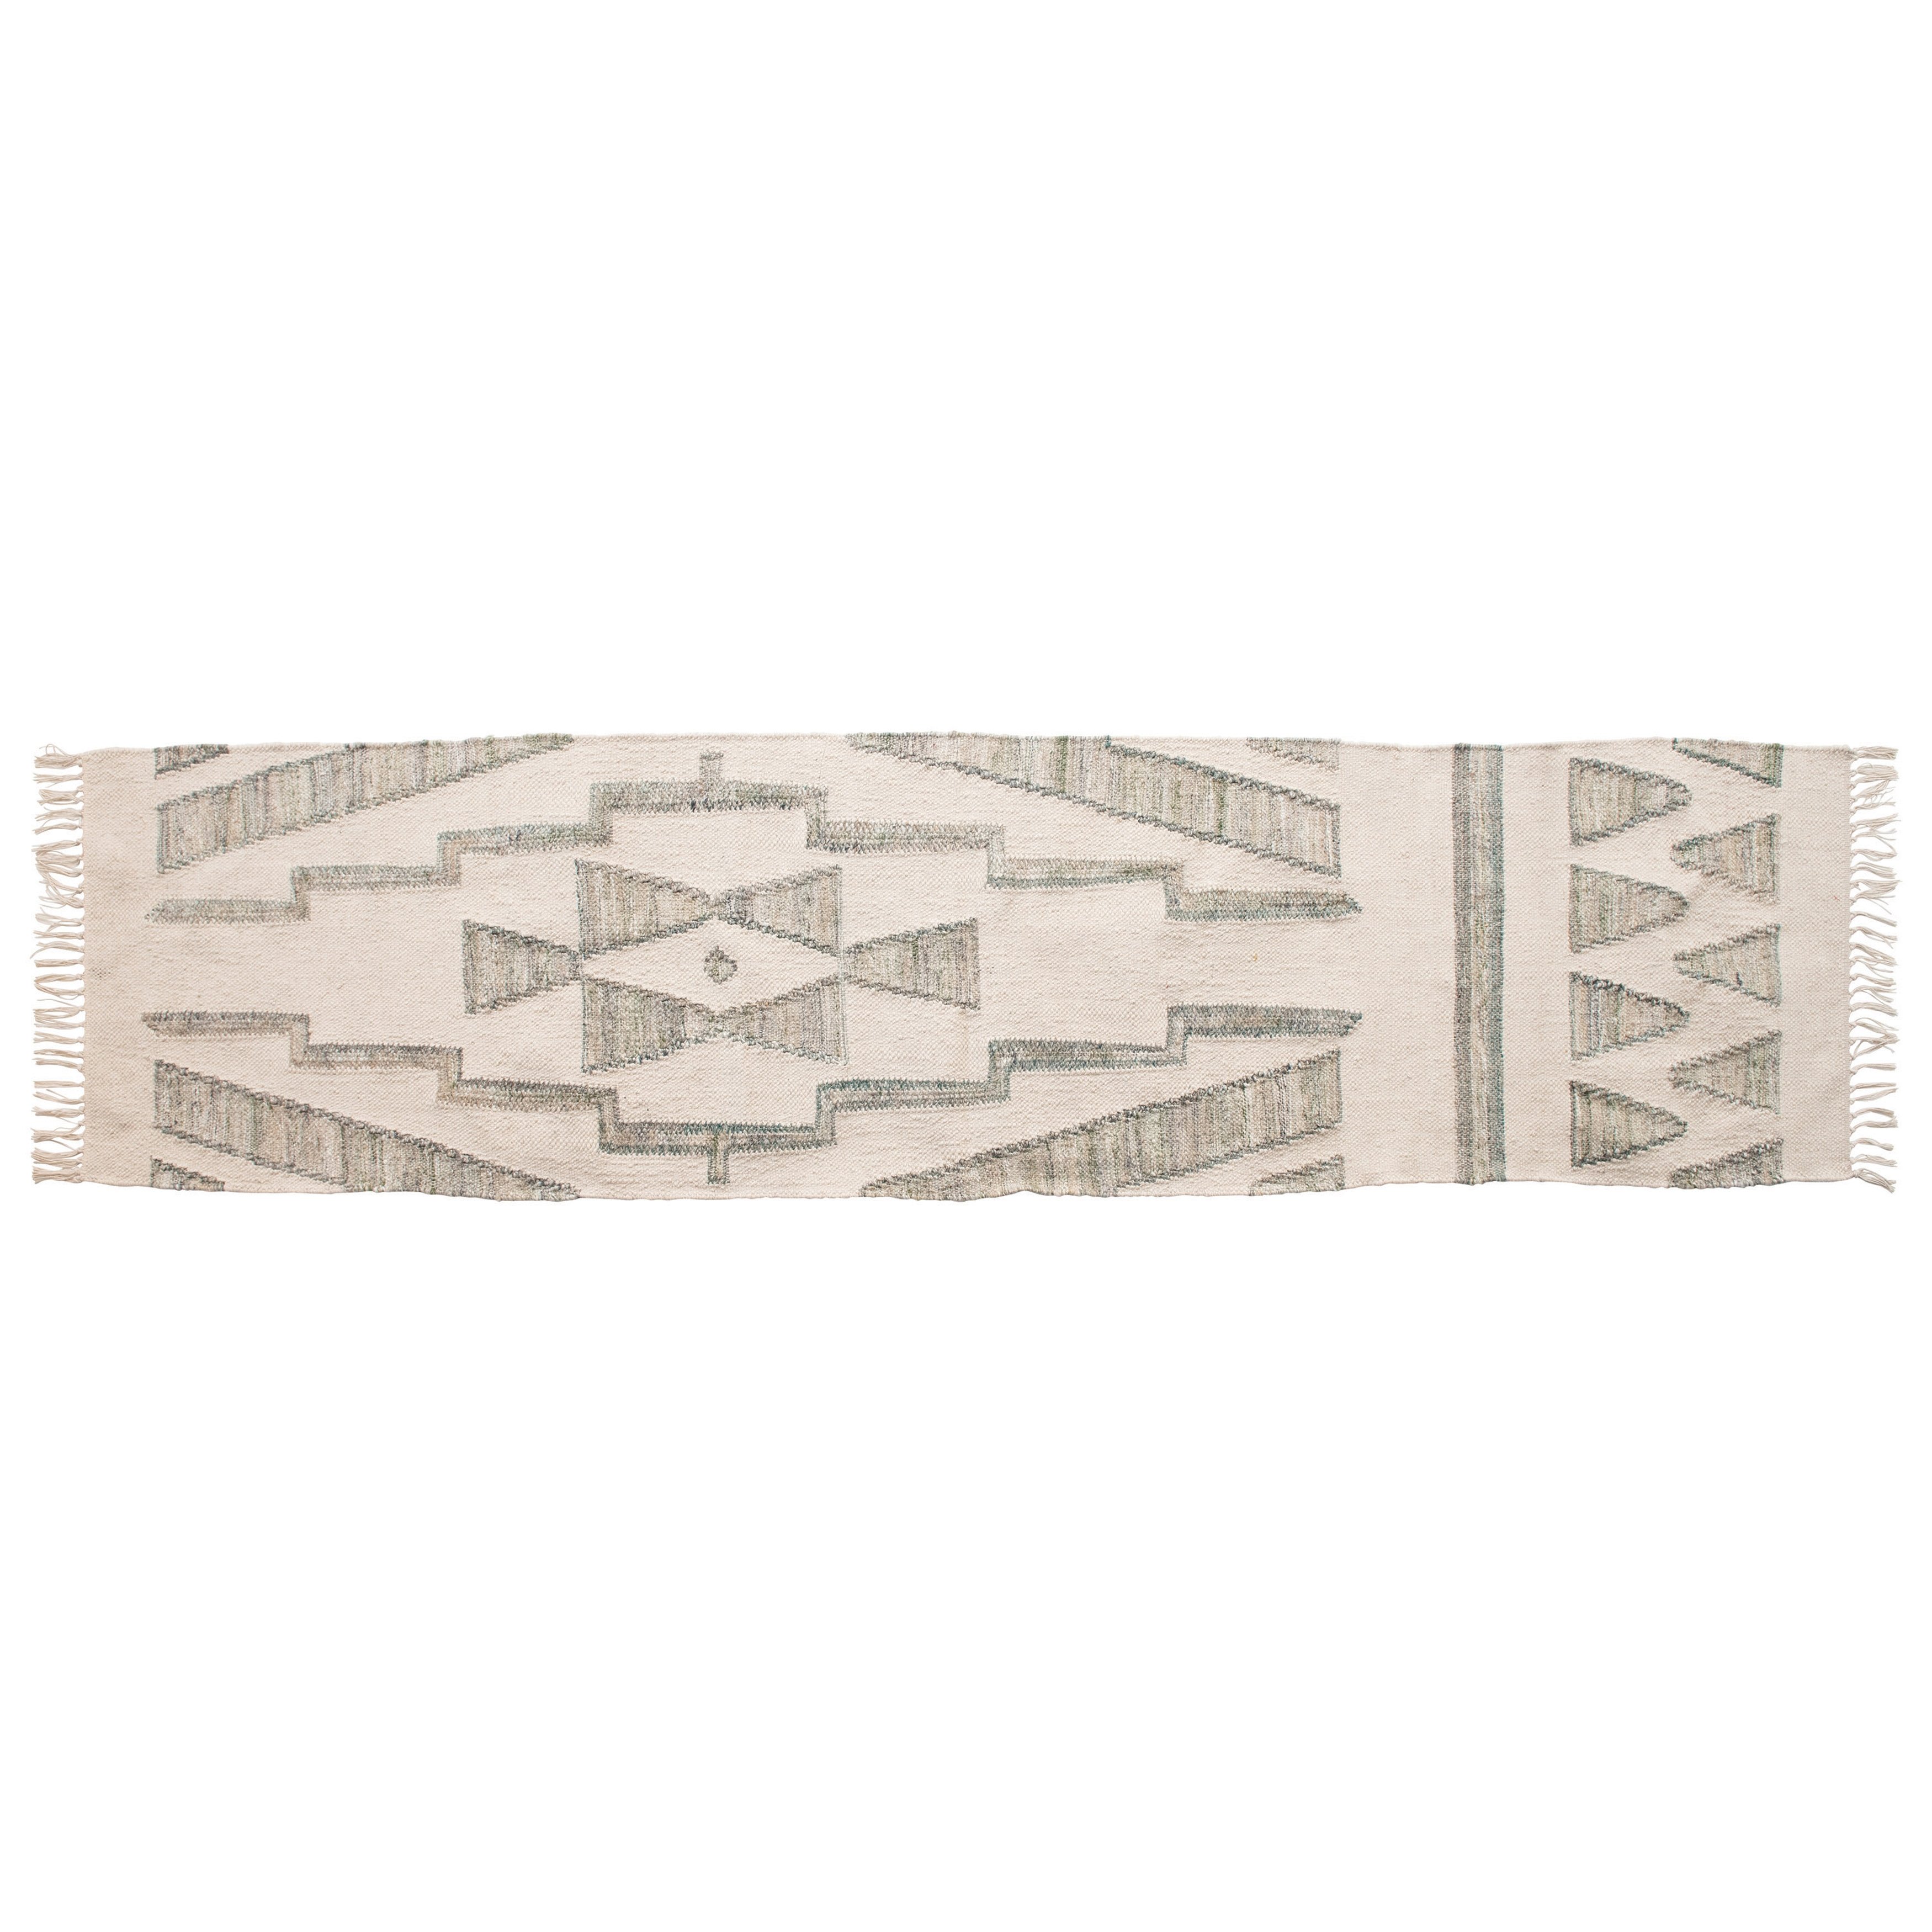 Hand-Woven Cotton & Wool Kilim Floor Runner, Variegated Green & Cream Color - Image 0